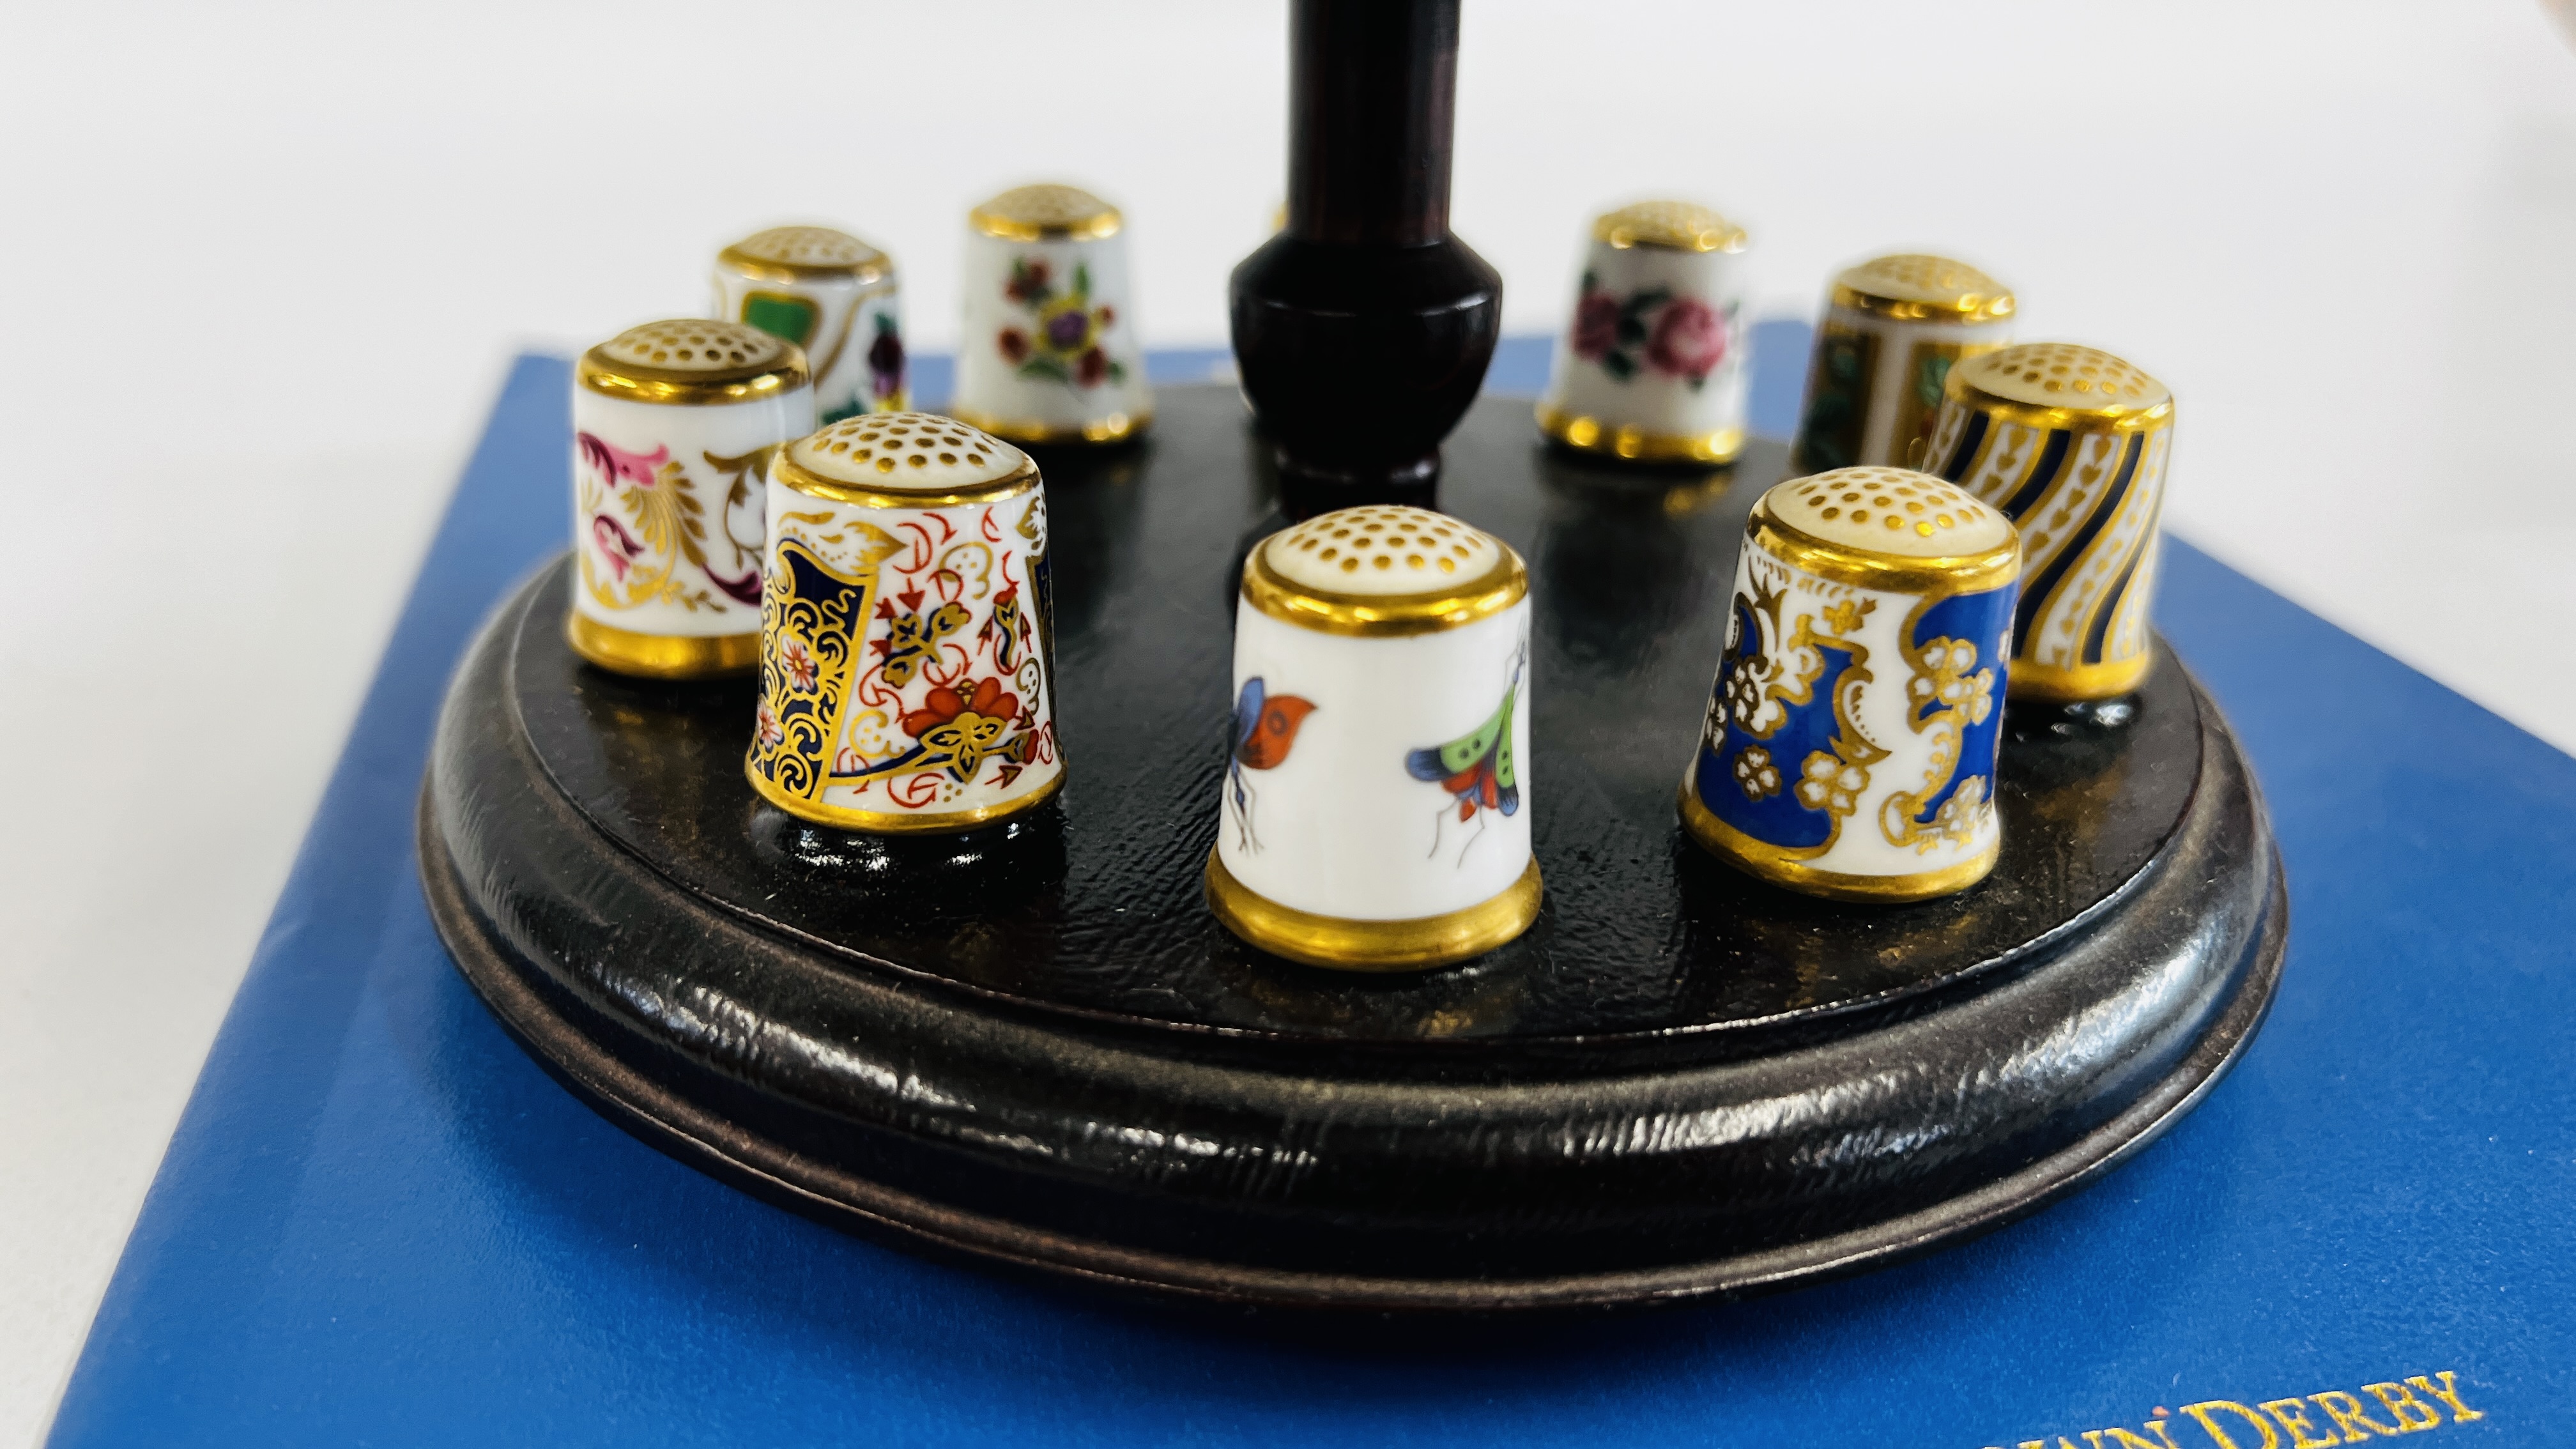 A COLLECTION OF 15 ROYAL CROWN DERBY THIMBLES ON A THIMBLE STAND WITH A PIN CUSHION INSET ALONG - Image 4 of 9